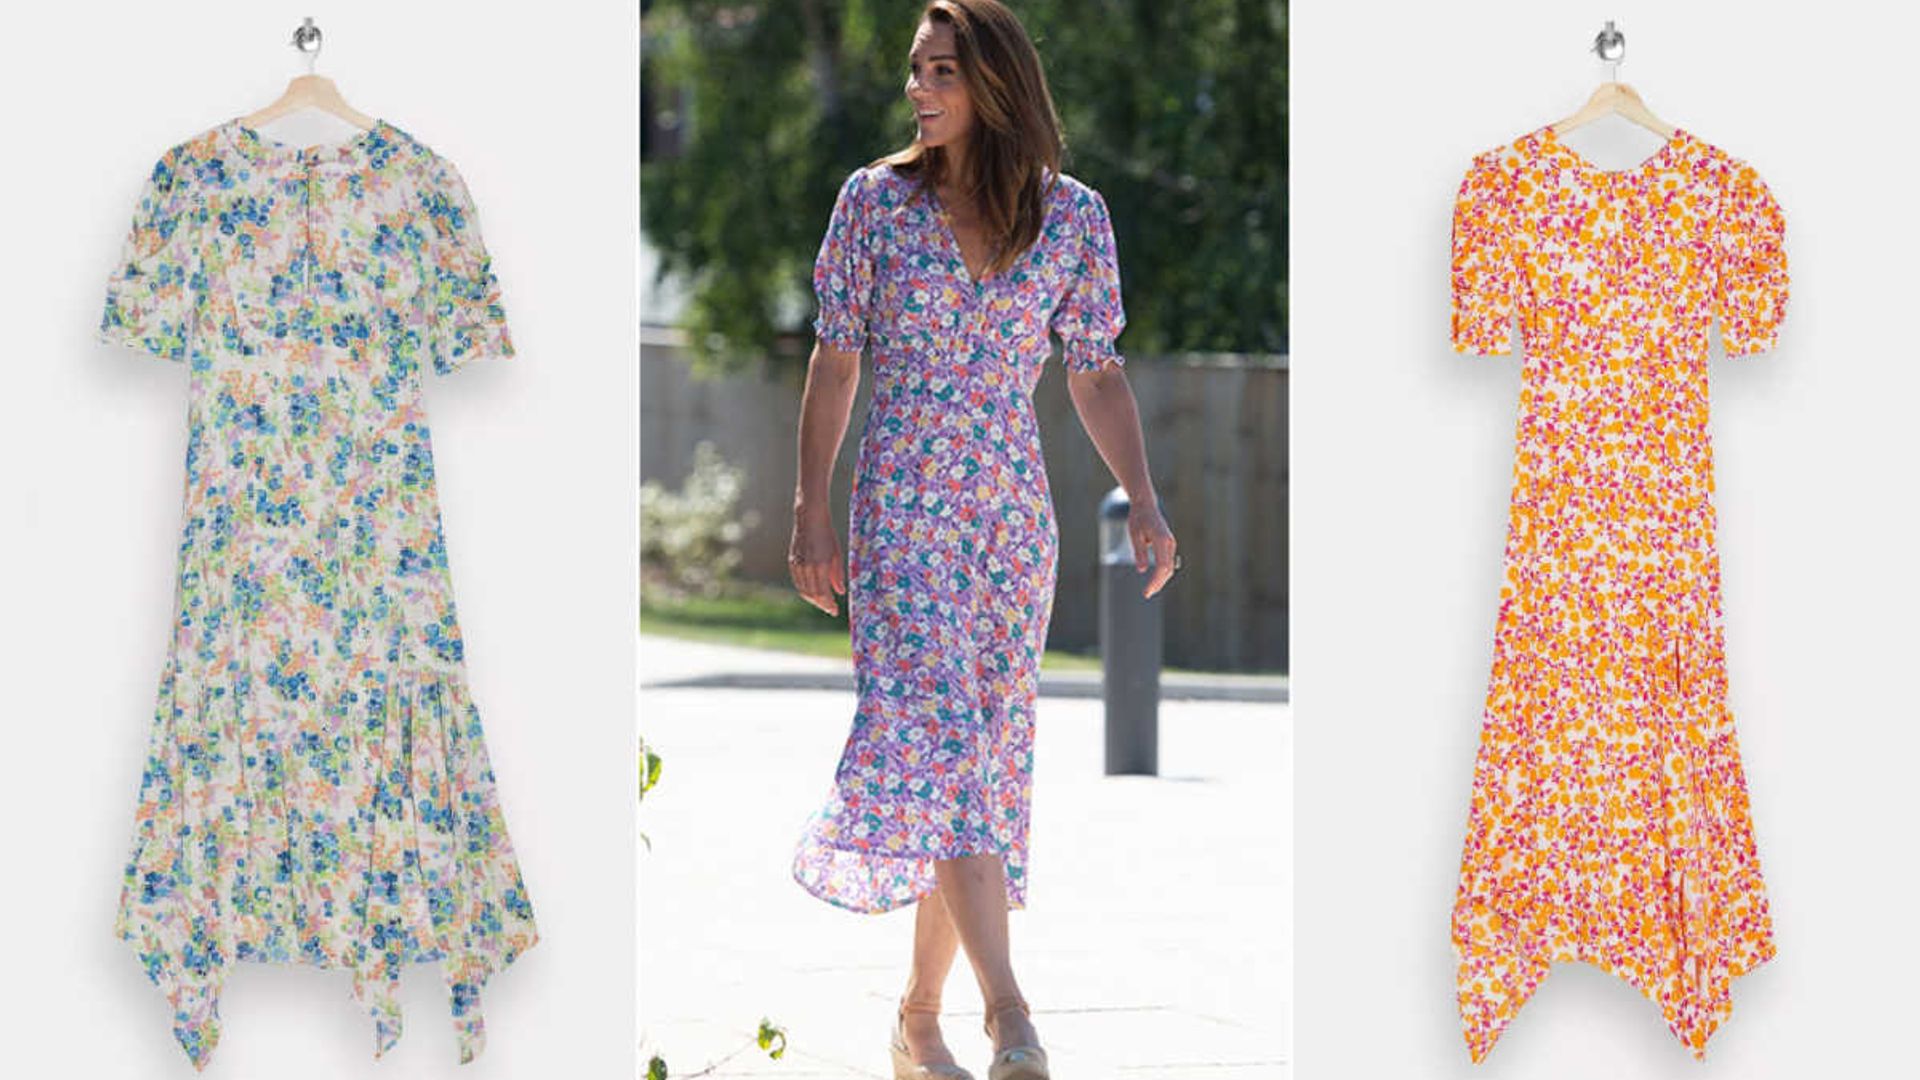 Topshop's new It dress has Kate Middleton's name written all over it